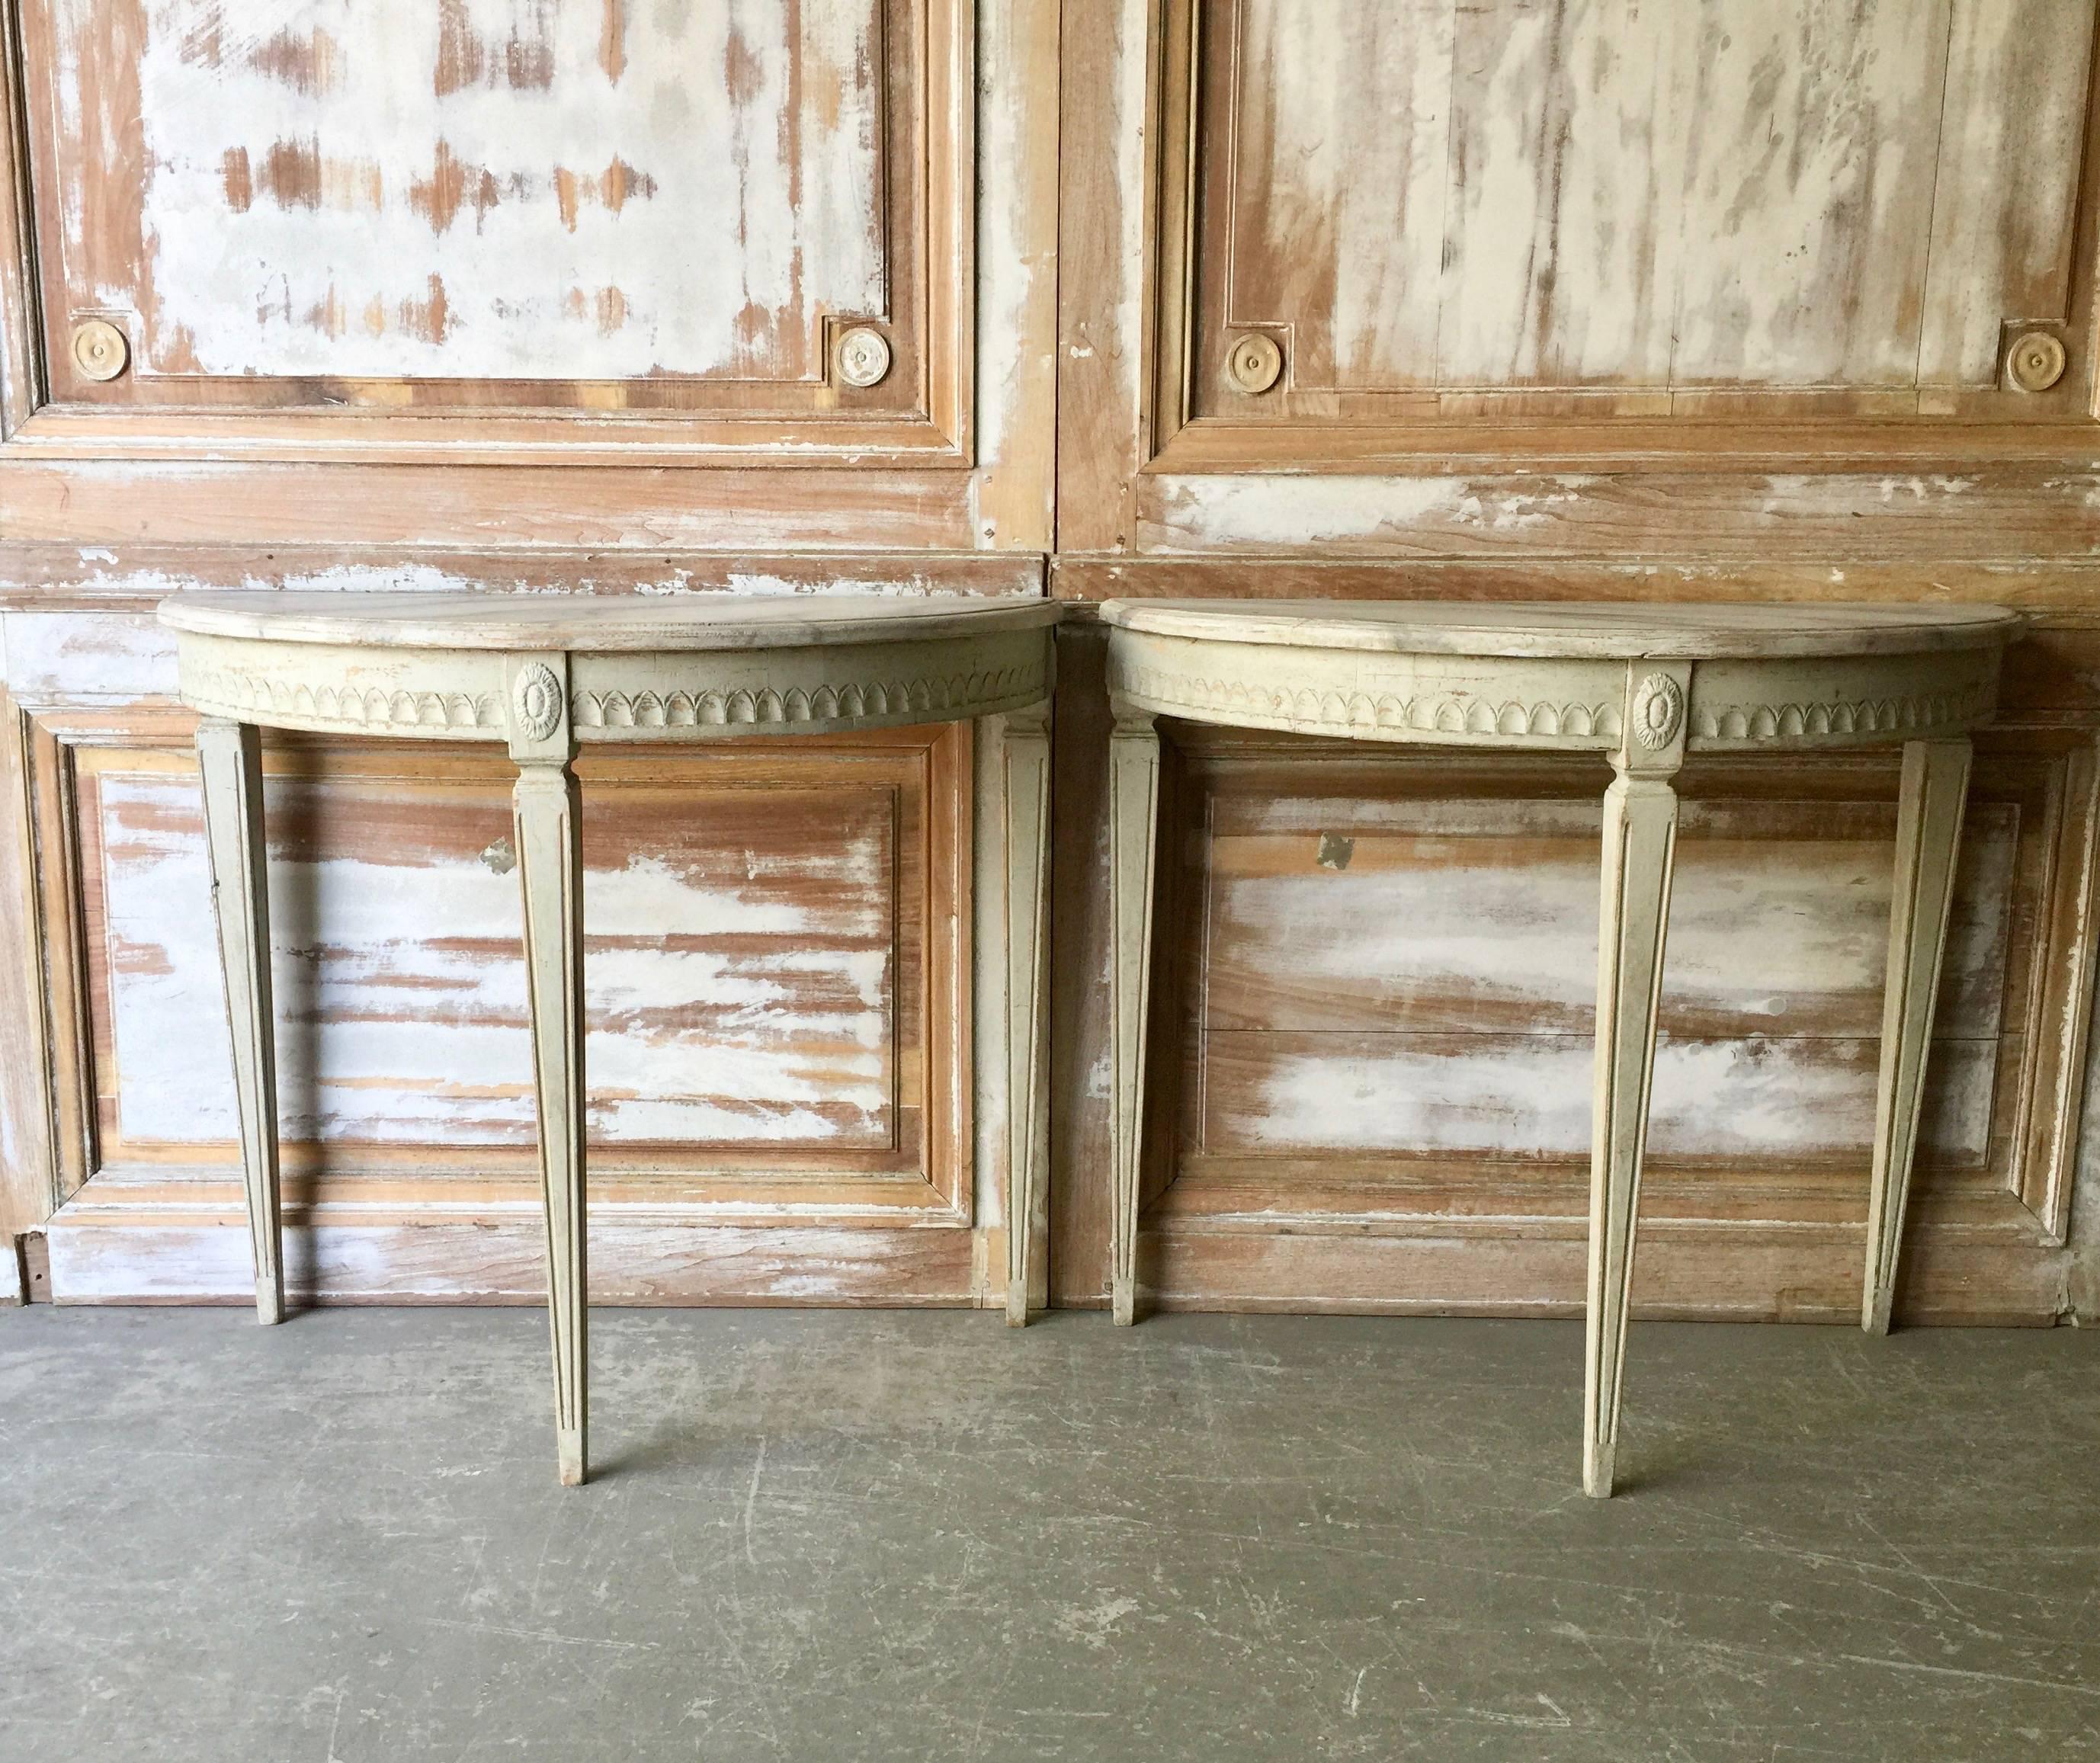 Rare pair of Swedish Gustavian period demilune console tables with marbleized tops and beautifully carved apron on elegant tapered and fluted legs.
Stockholm, Sweden, circa 1810.
More than ever, we selected the best, the rarest, the unusual, the